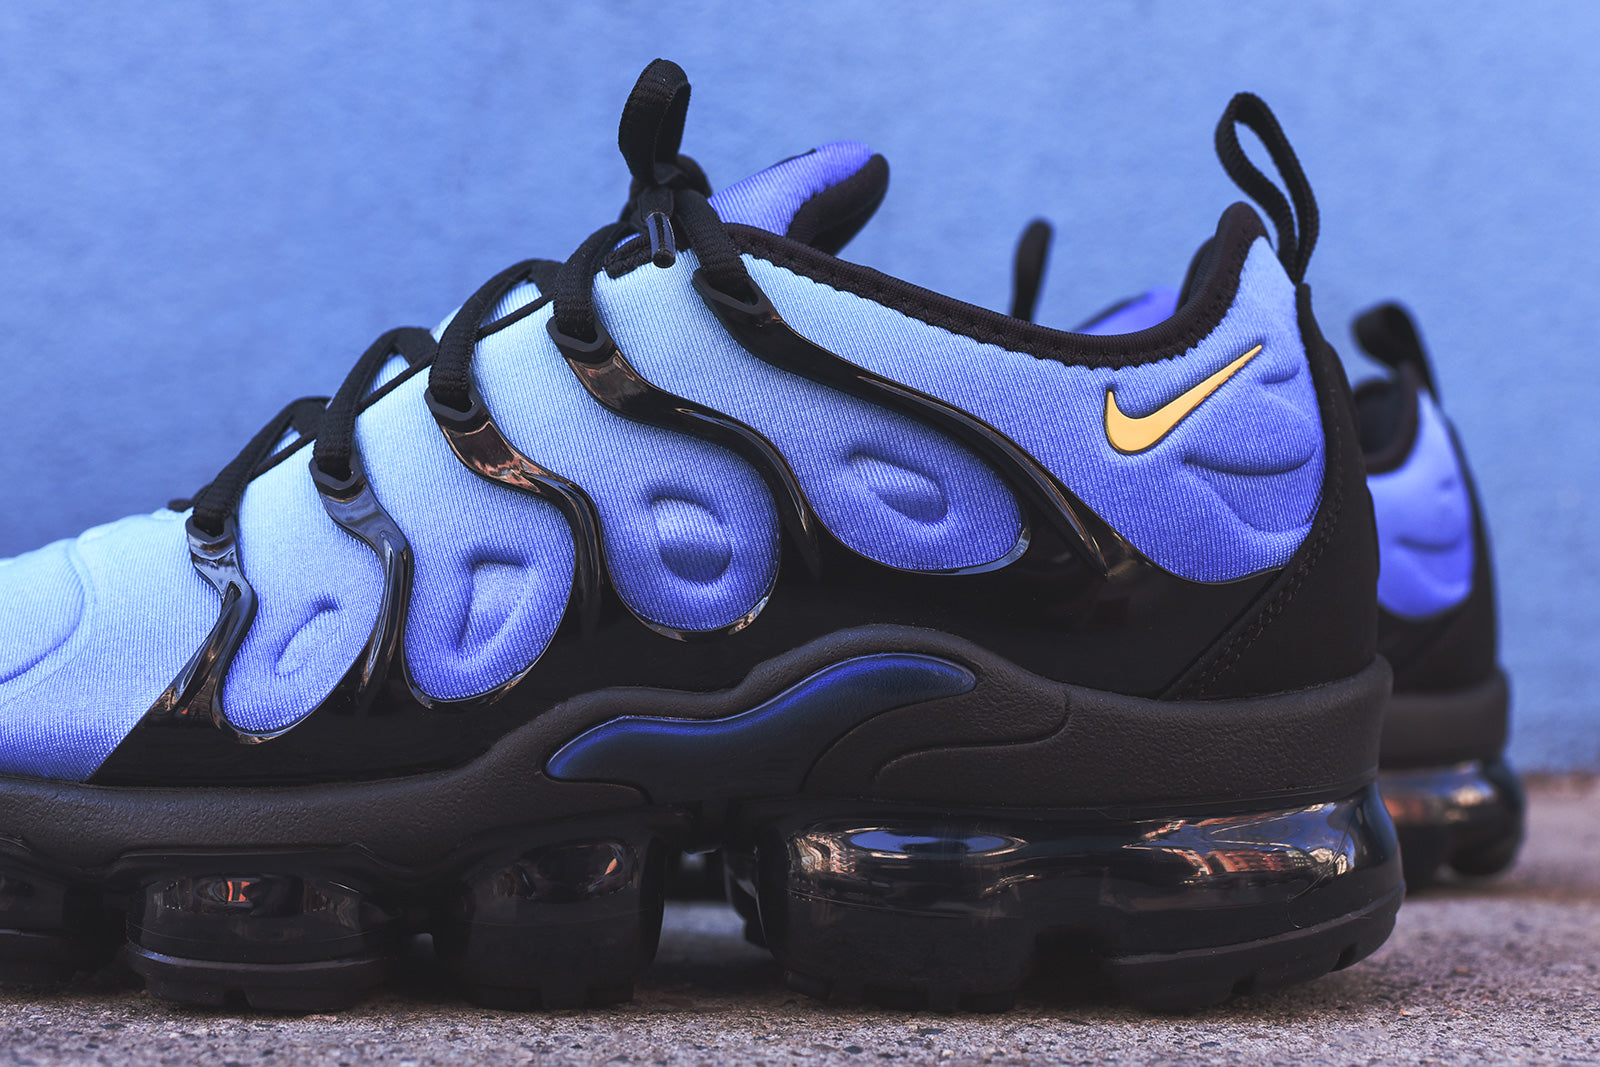 Buy new nike shoes vapormax plus OFF 76